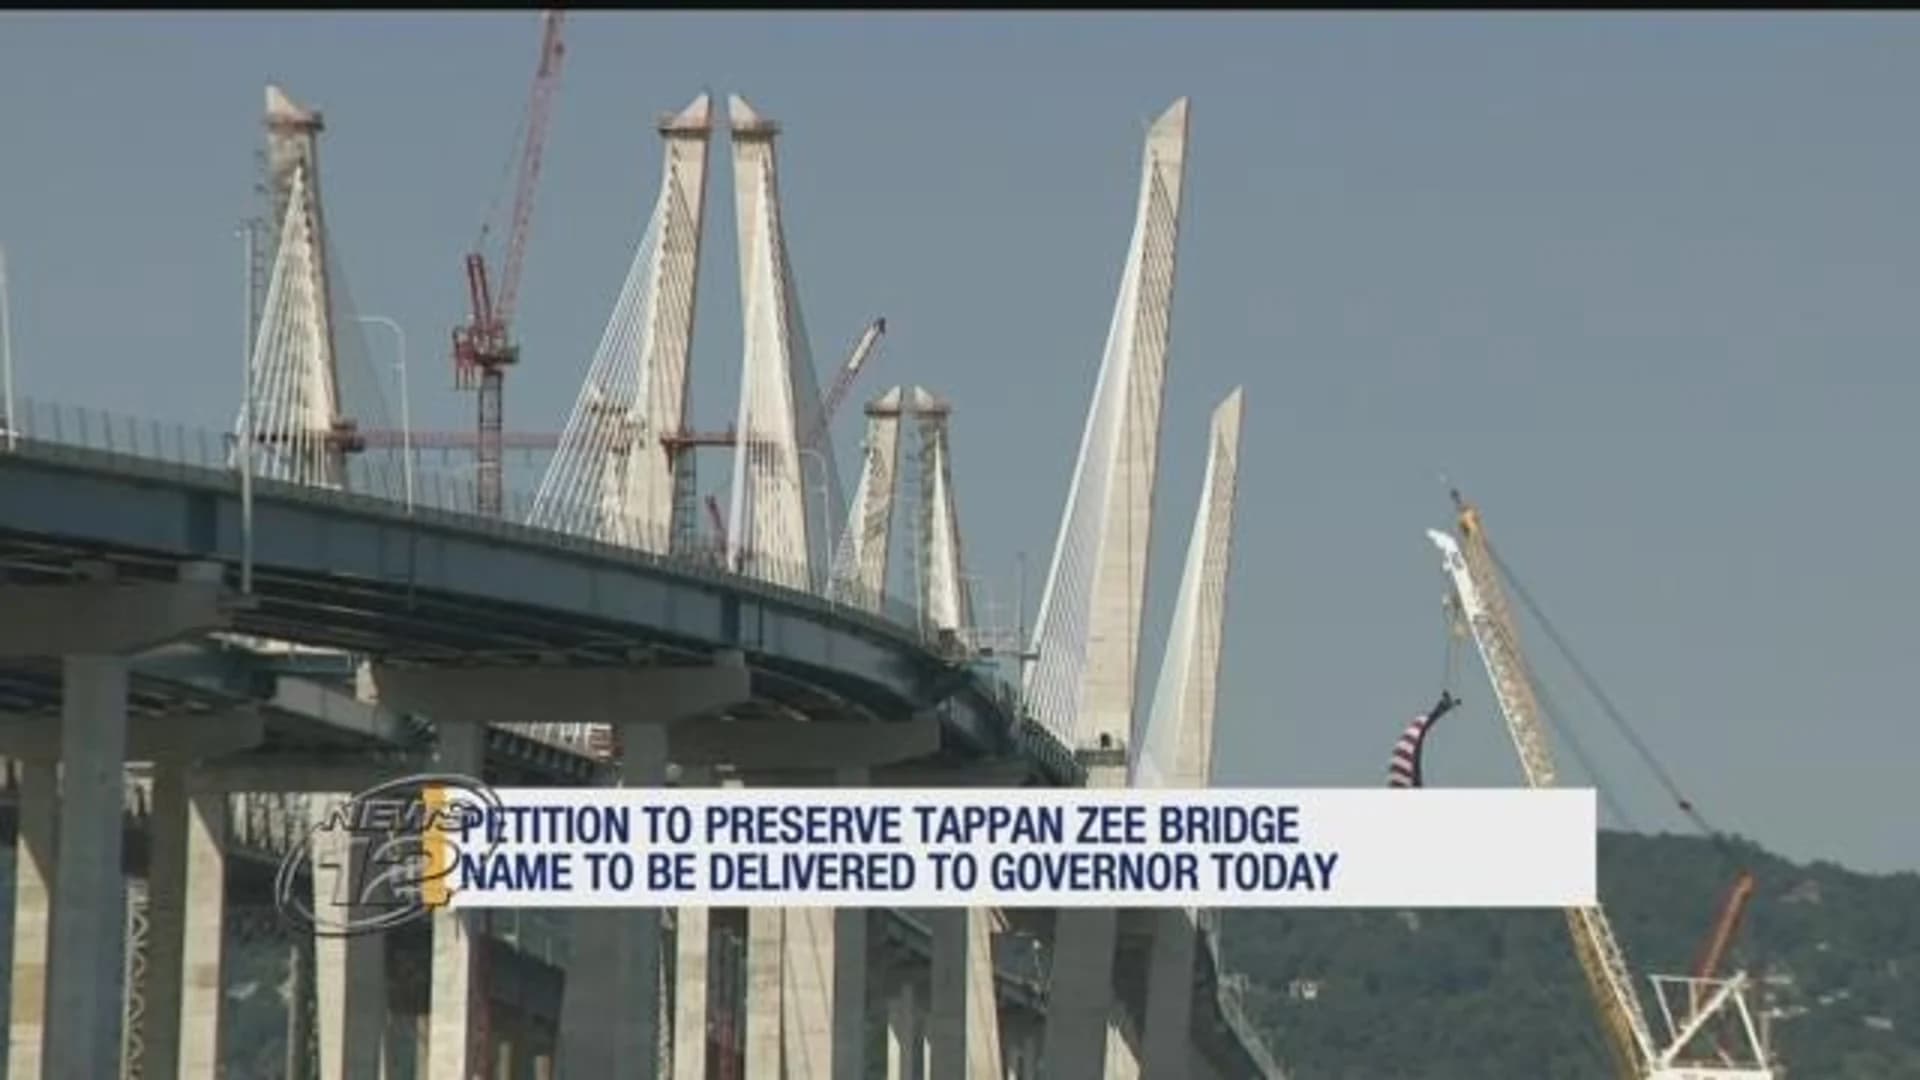 Fight over bridge name: Is it the Tappan Zee or Mario Cuomo?